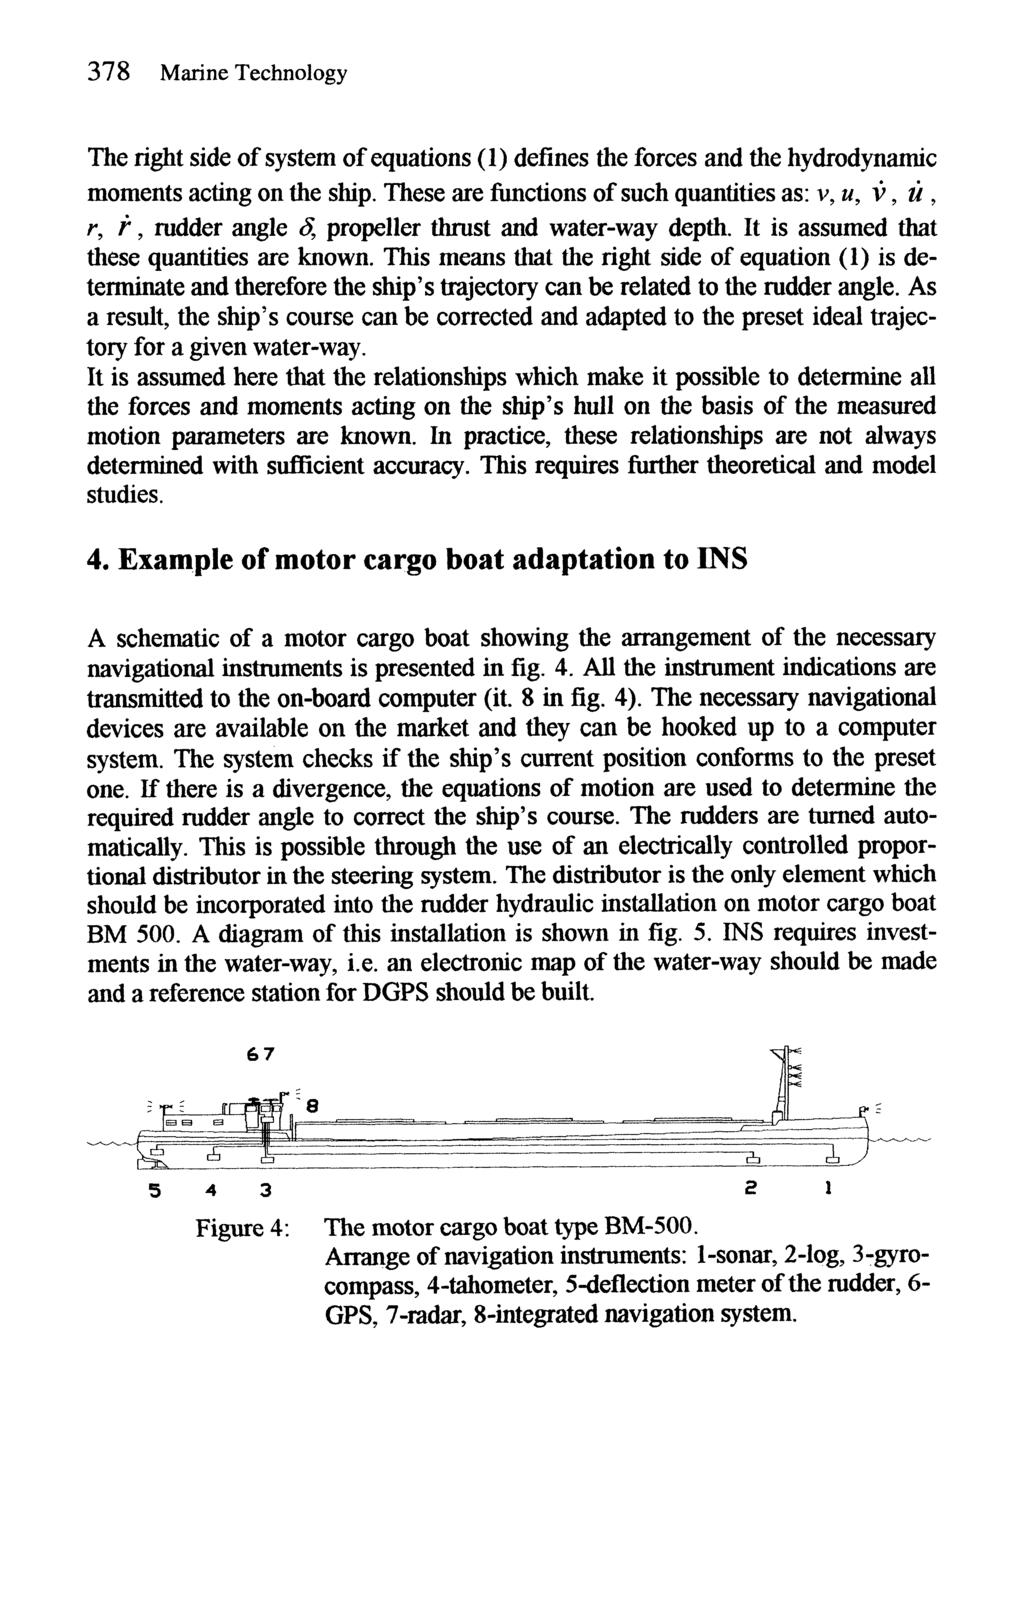 378 Marine Technology The right side of system of equations (1) defines the forces and the hydrodynamic moments acting on the ship.